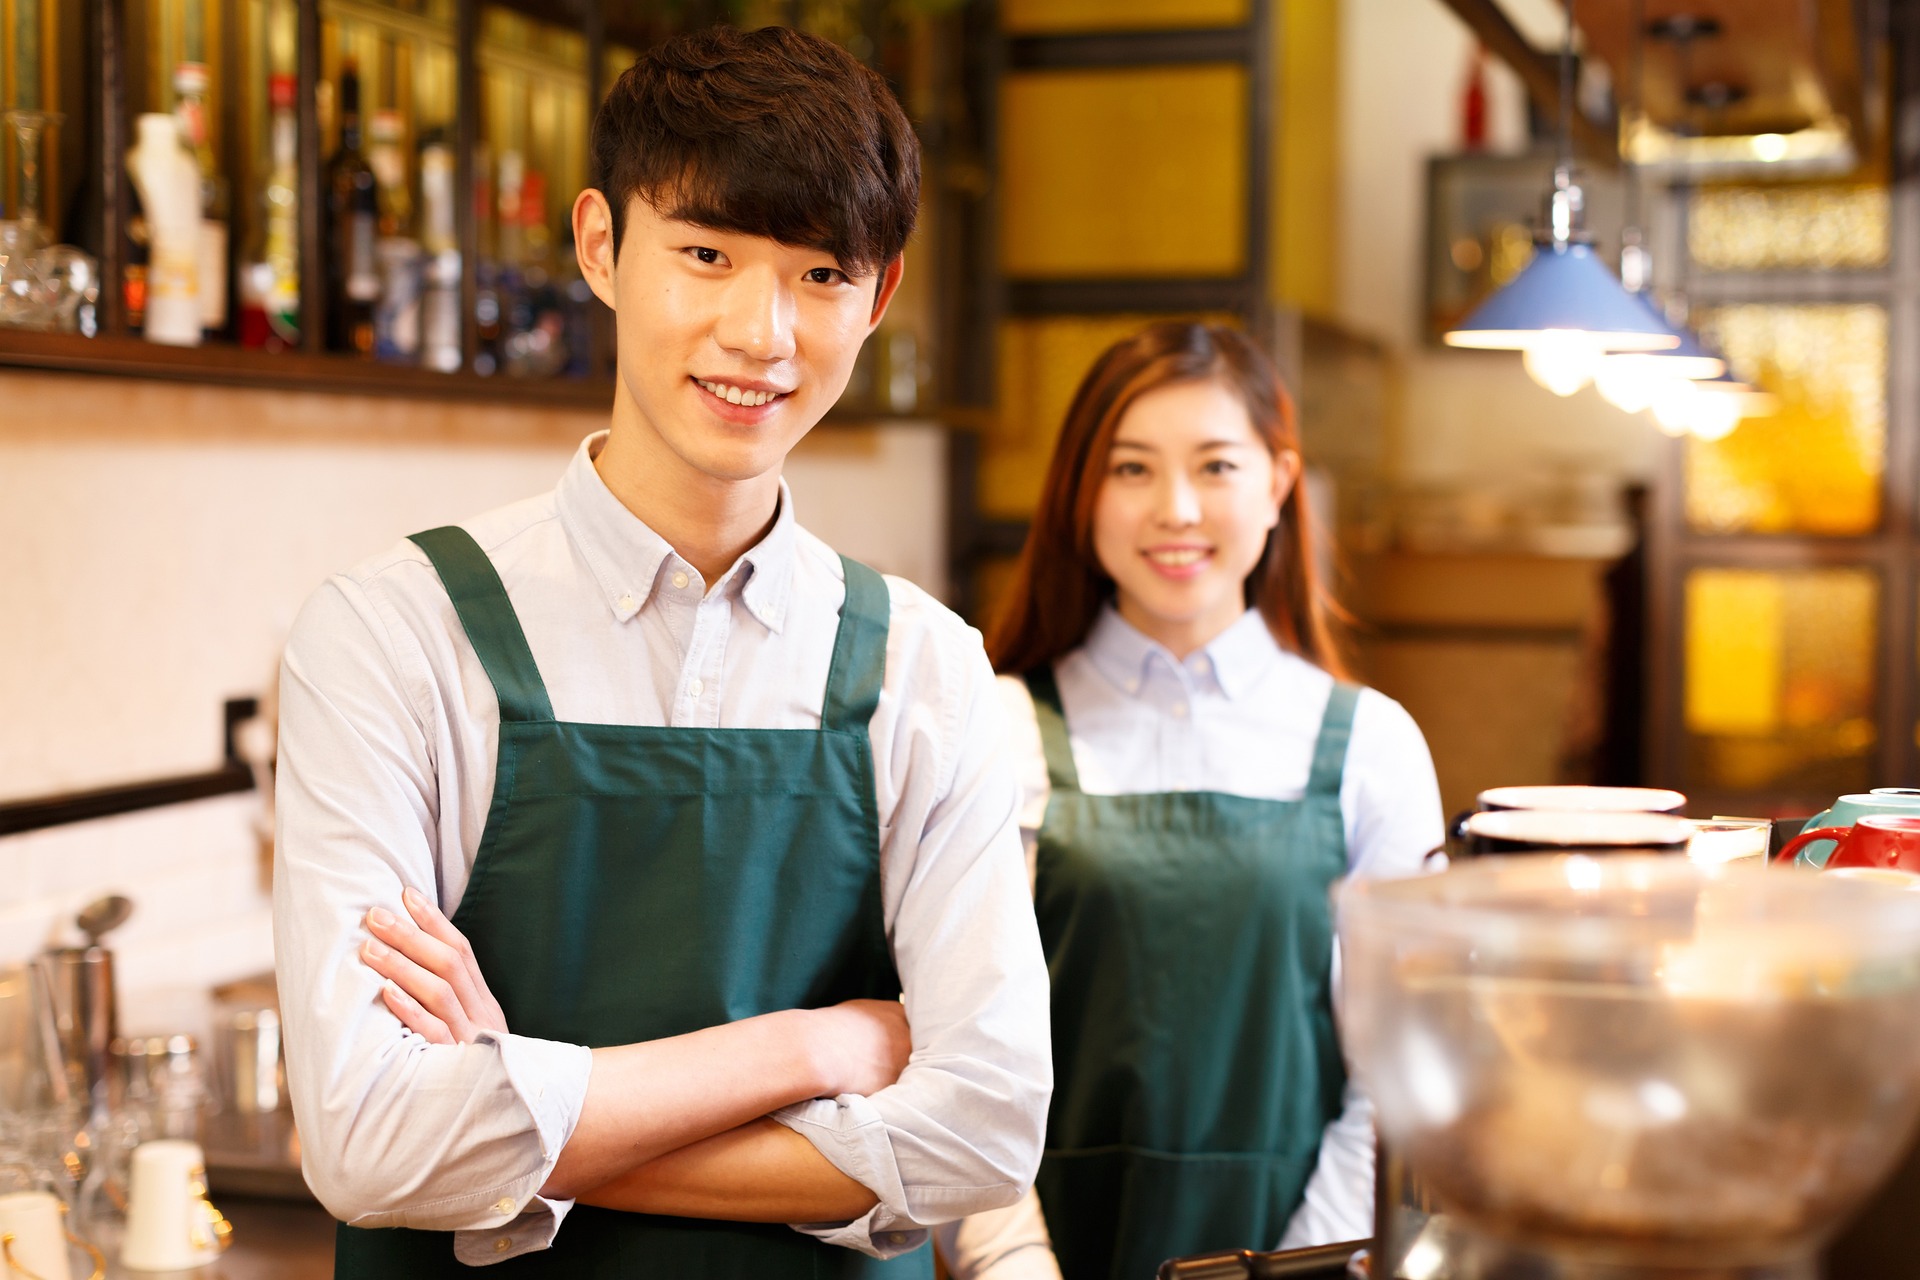 Two restaurant employees wearing green aprons